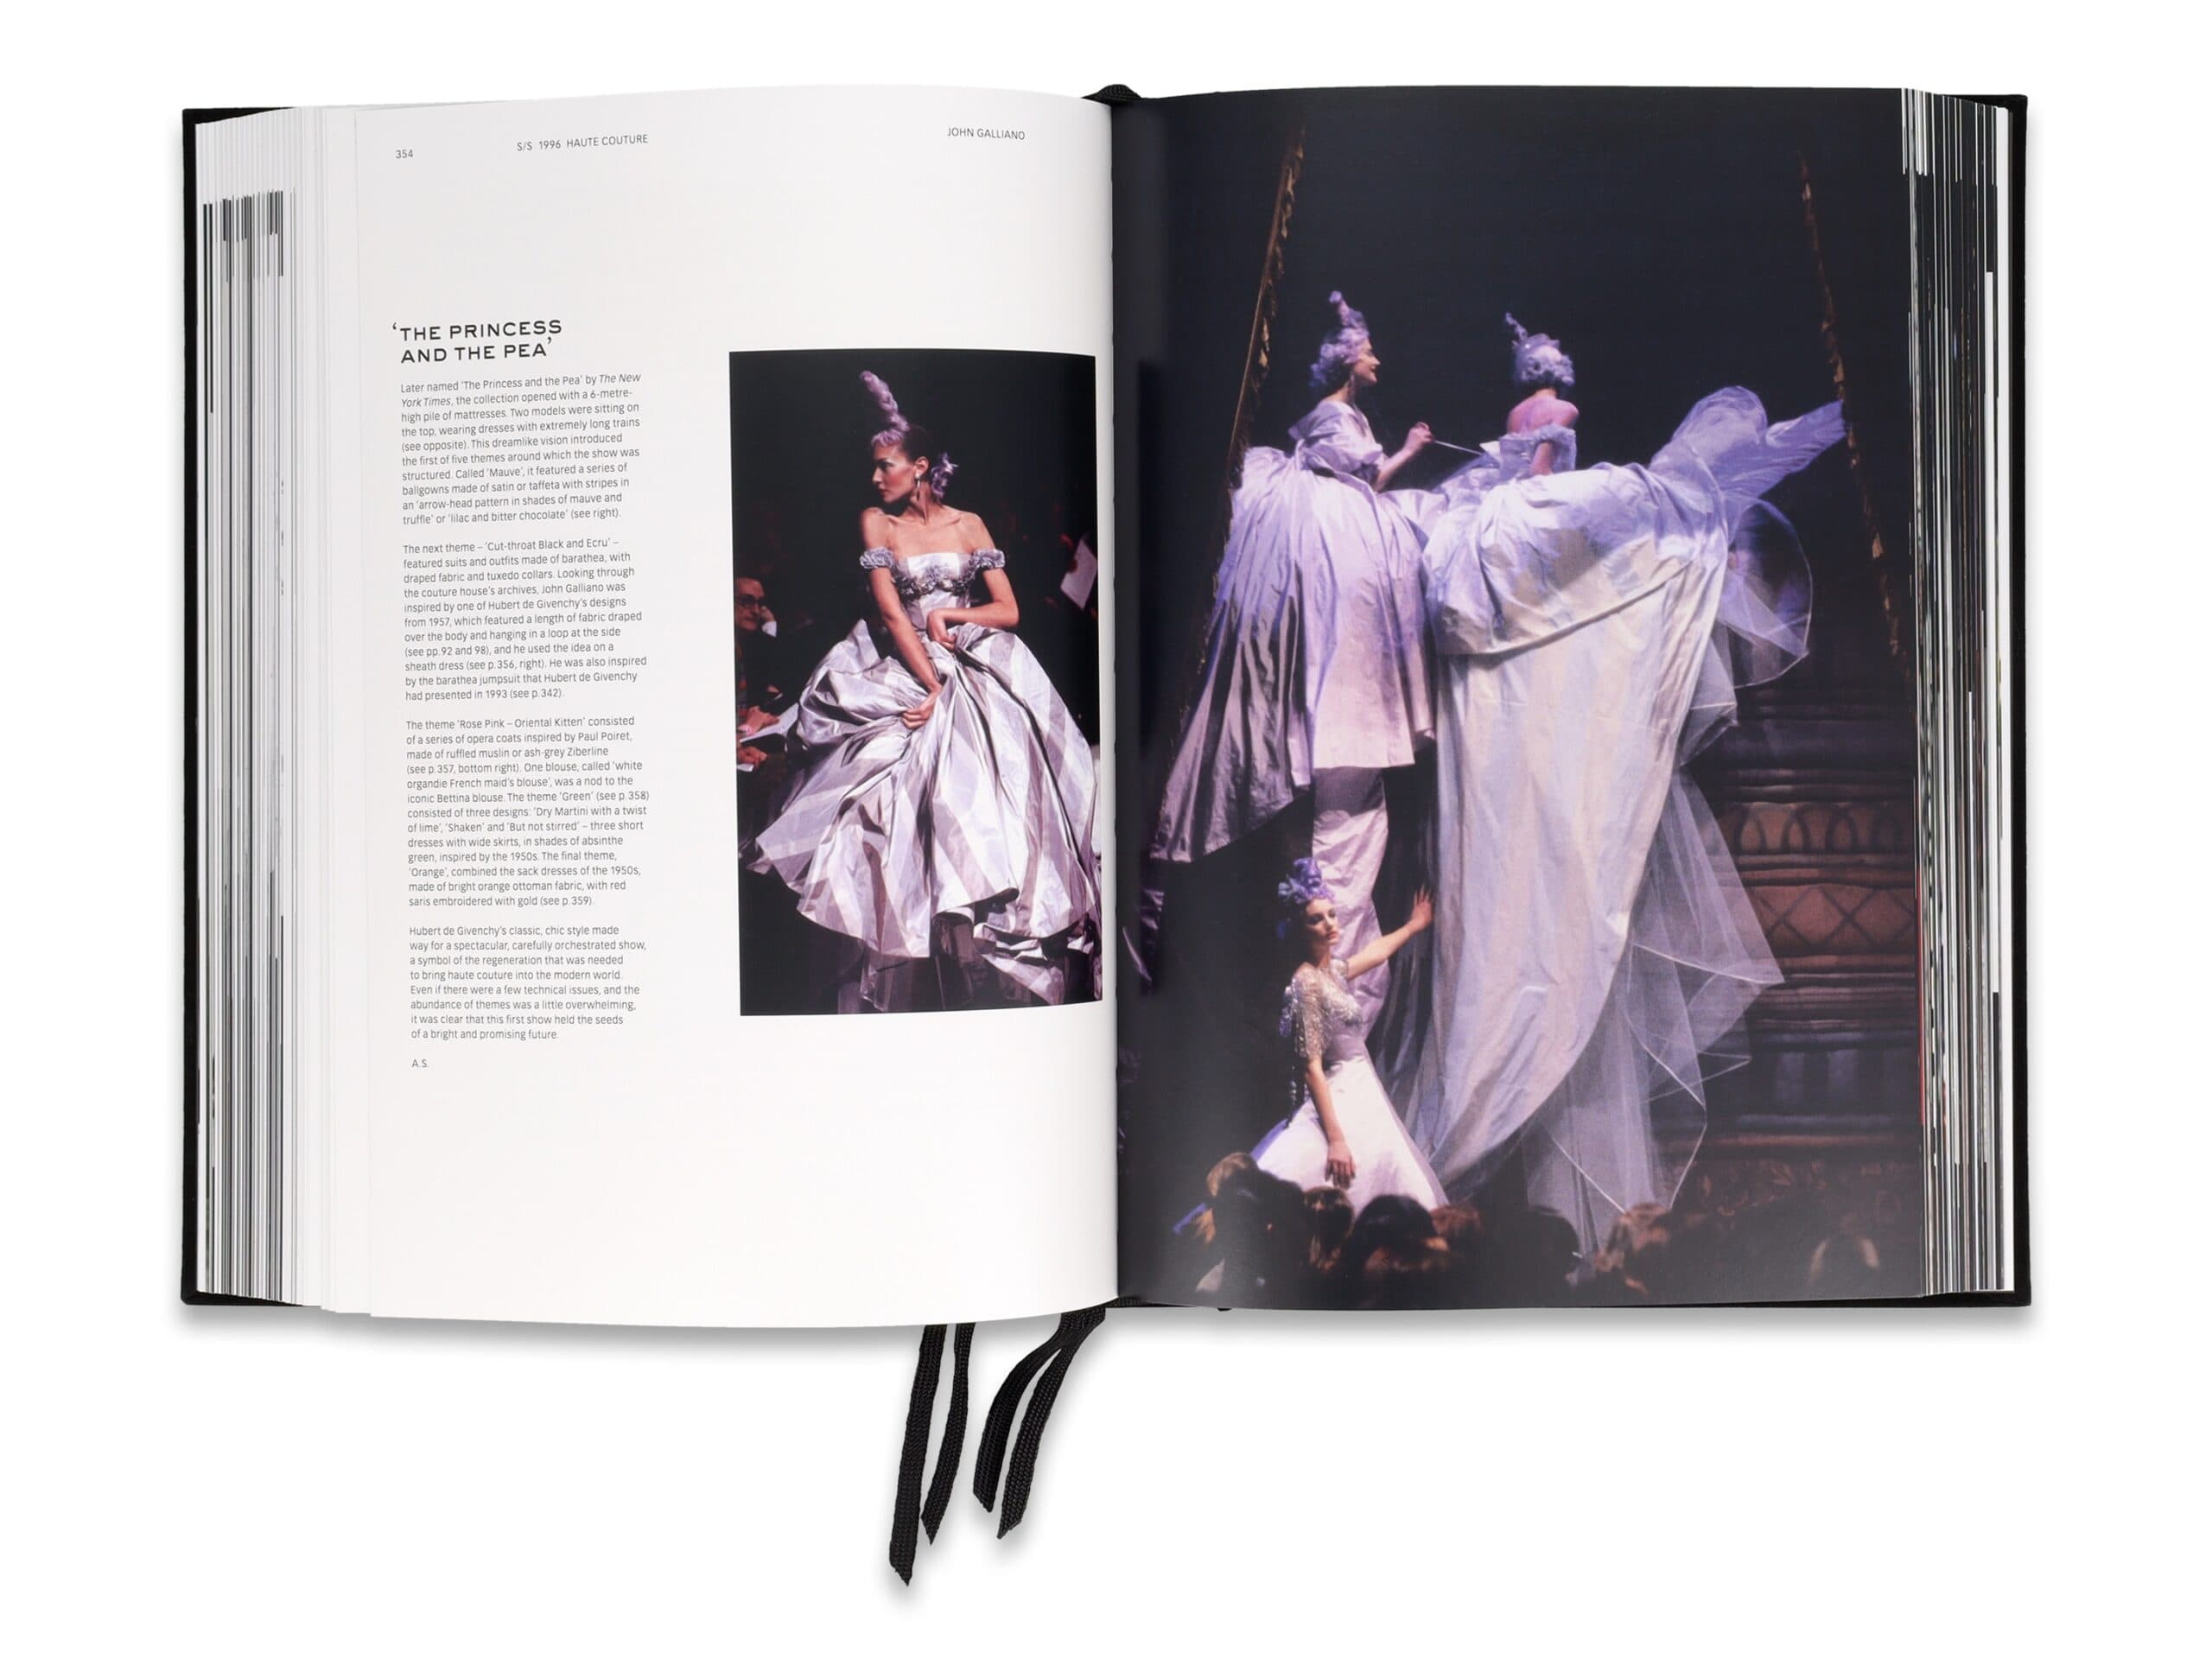 Givenchy Launches Catwalk Book of Complete Collections